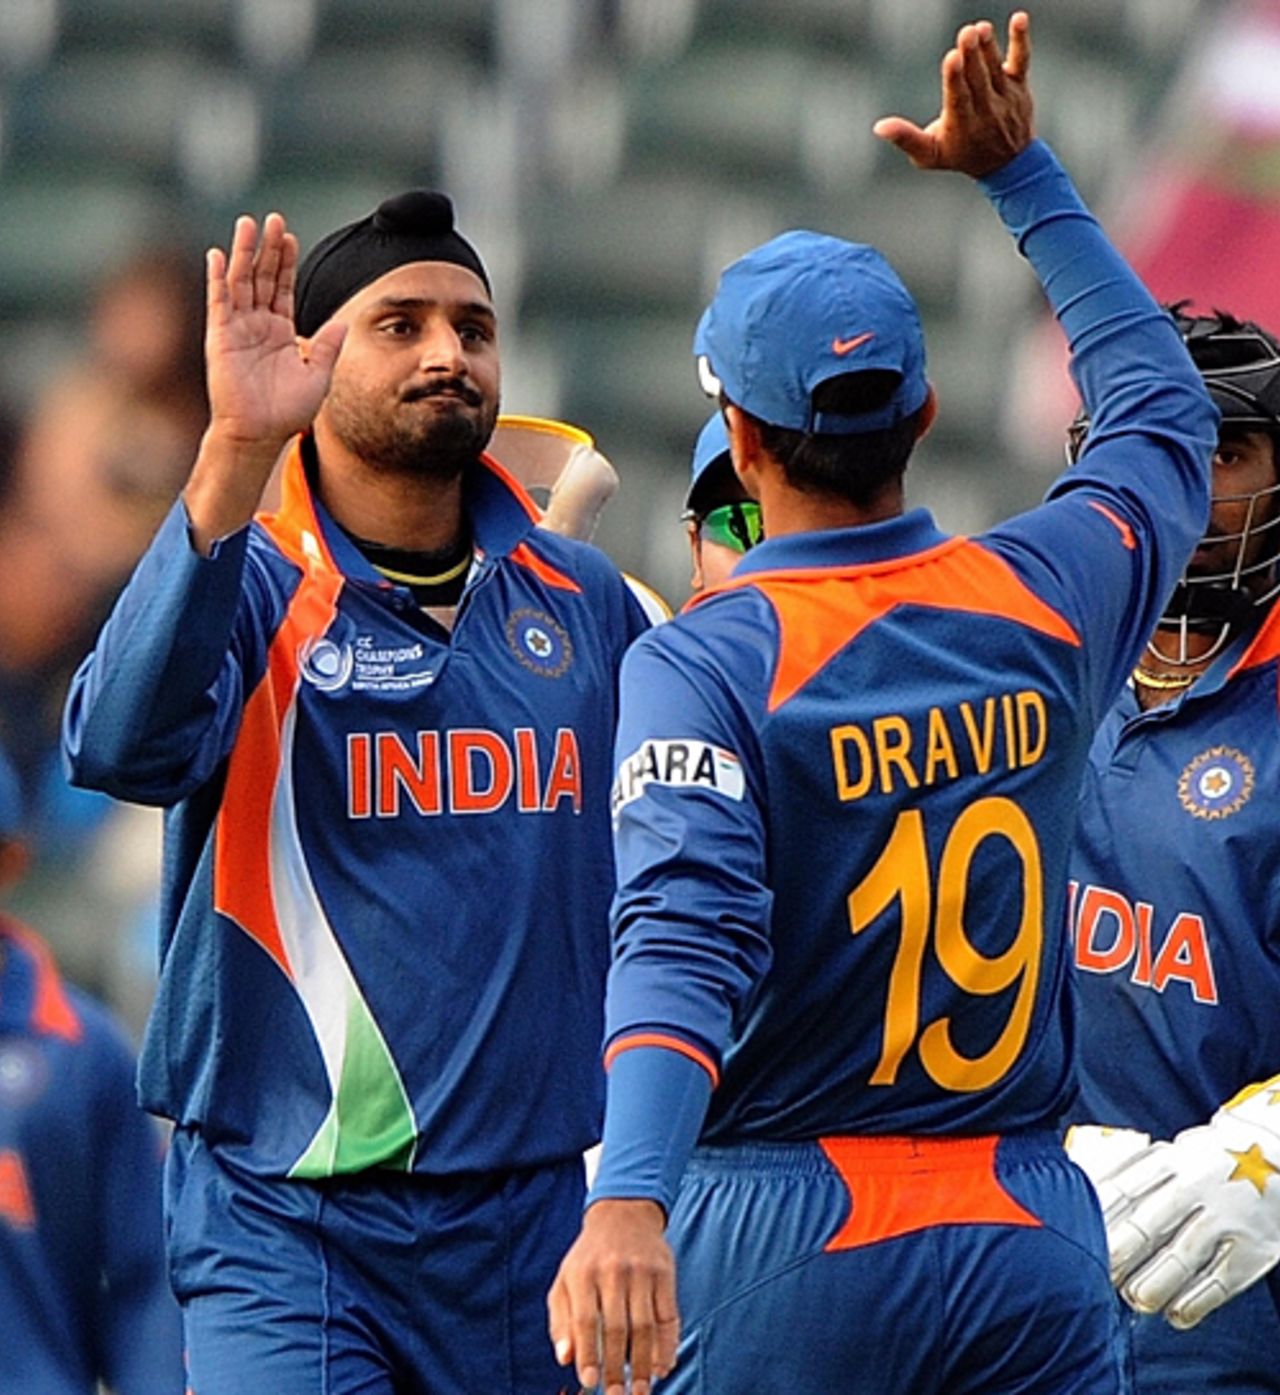 Harbhajan Singh is congratulated on removing Royston Crandon, India v West Indies, Champions Trophy, Group A, Johannesburg, September 30, 2009